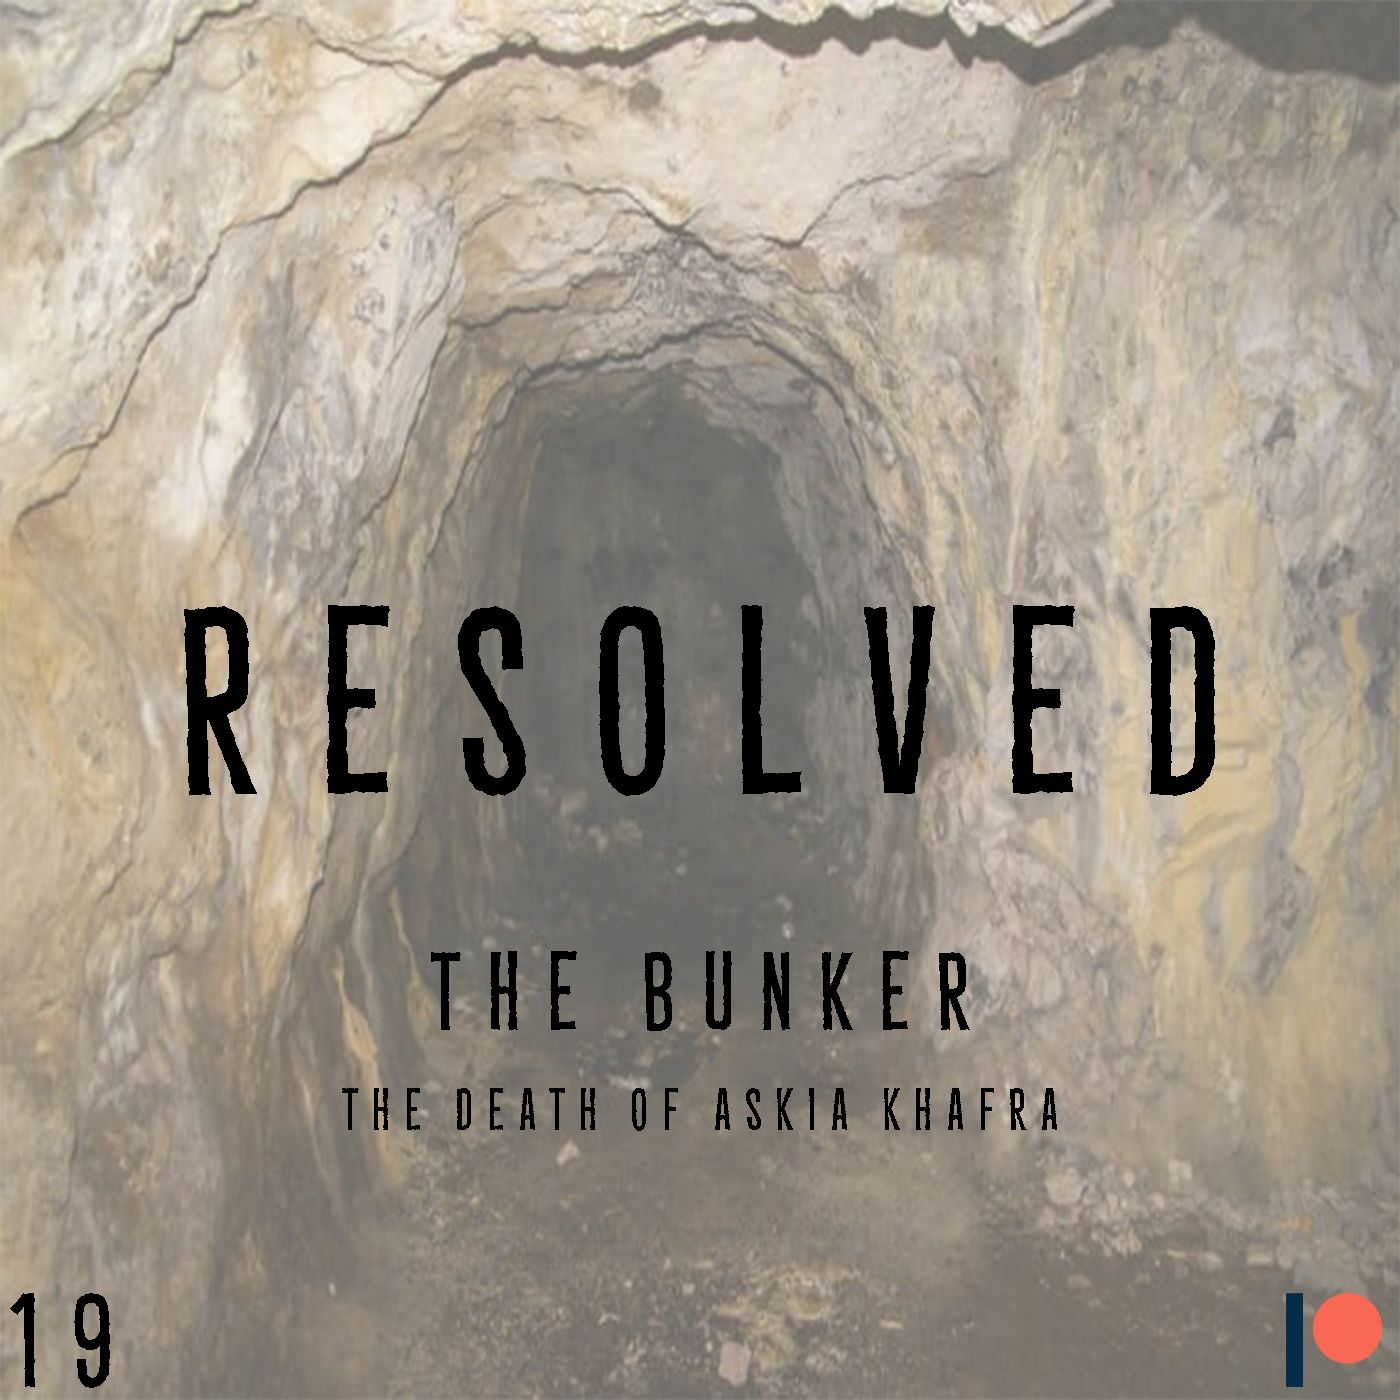 Preview: The Bunker (Resolved)